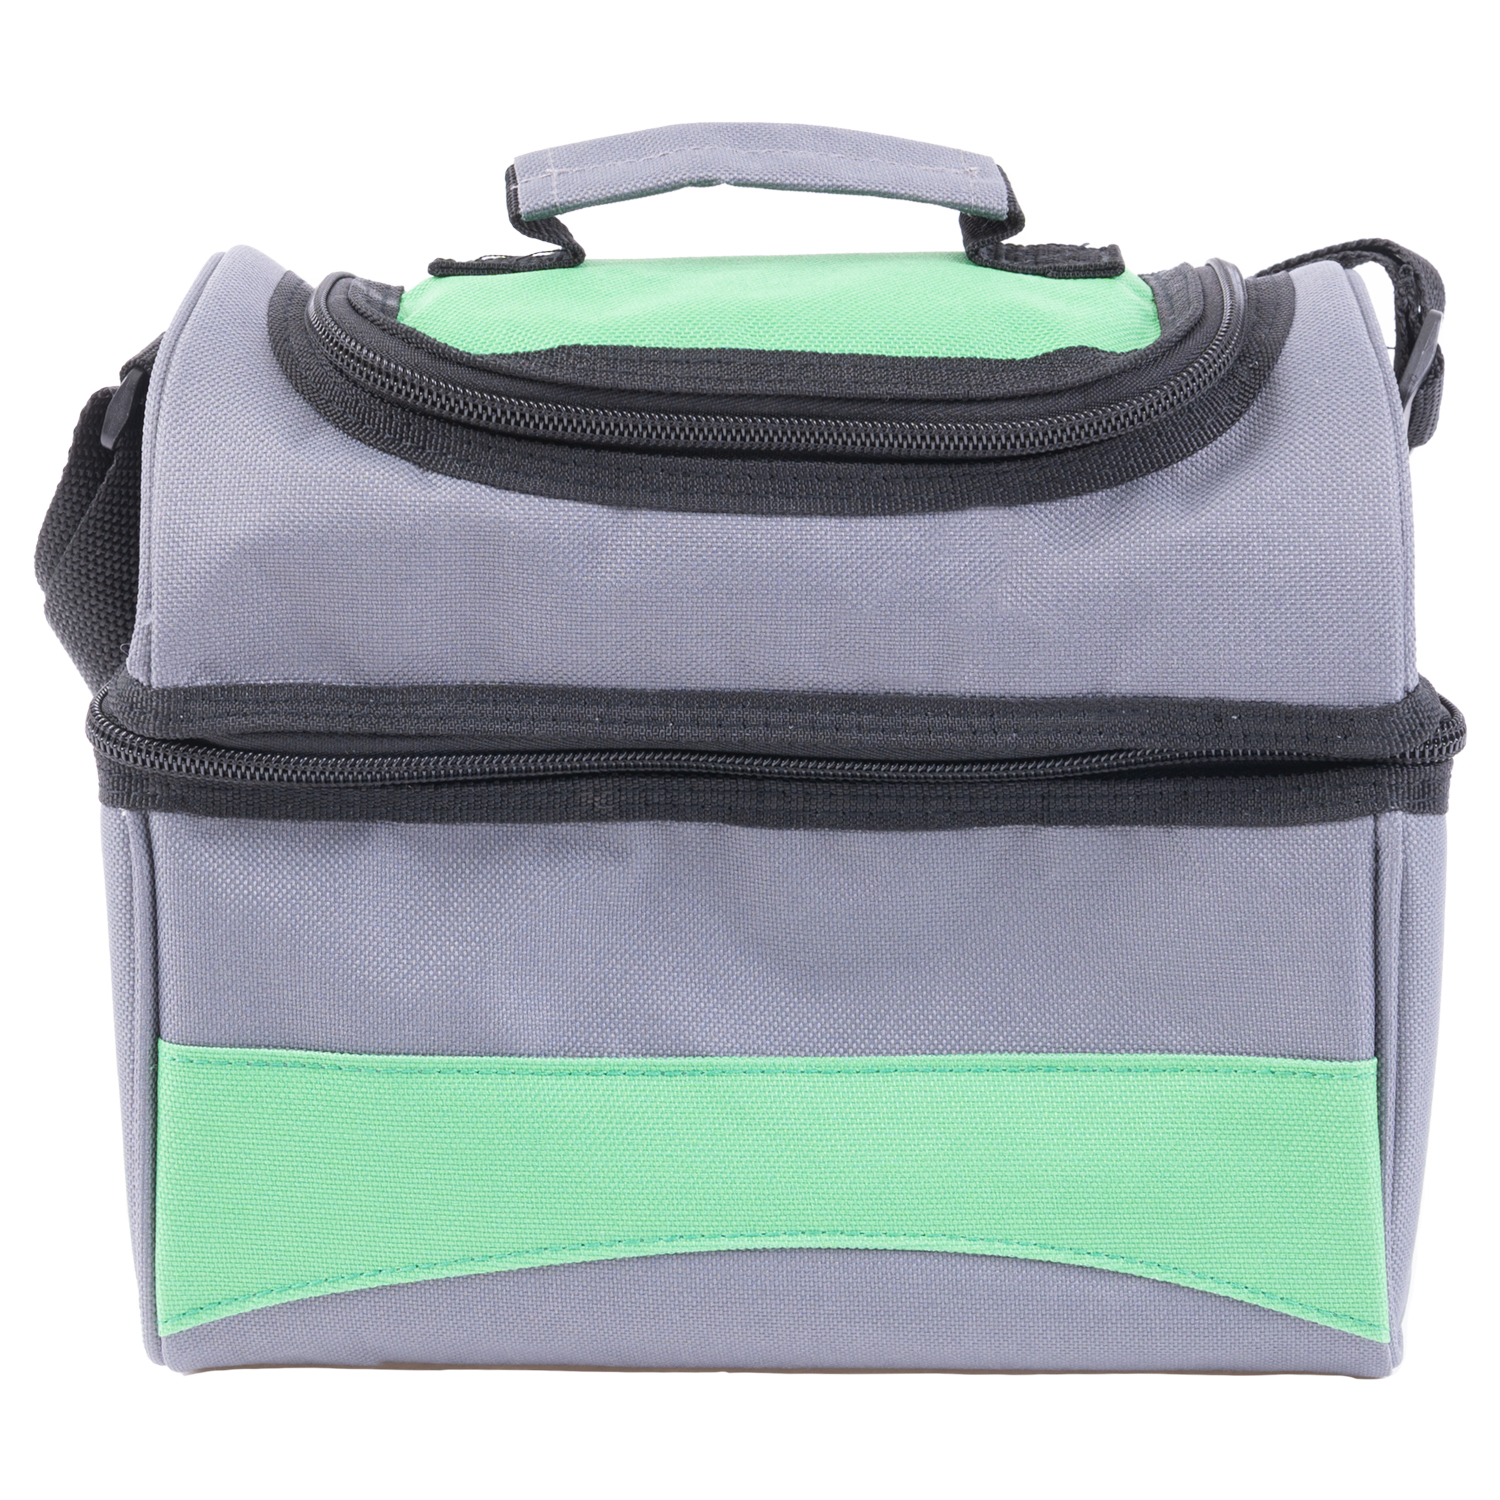 Lunch box tote bag, insulated for work, travel, picnic or camping, grey and green